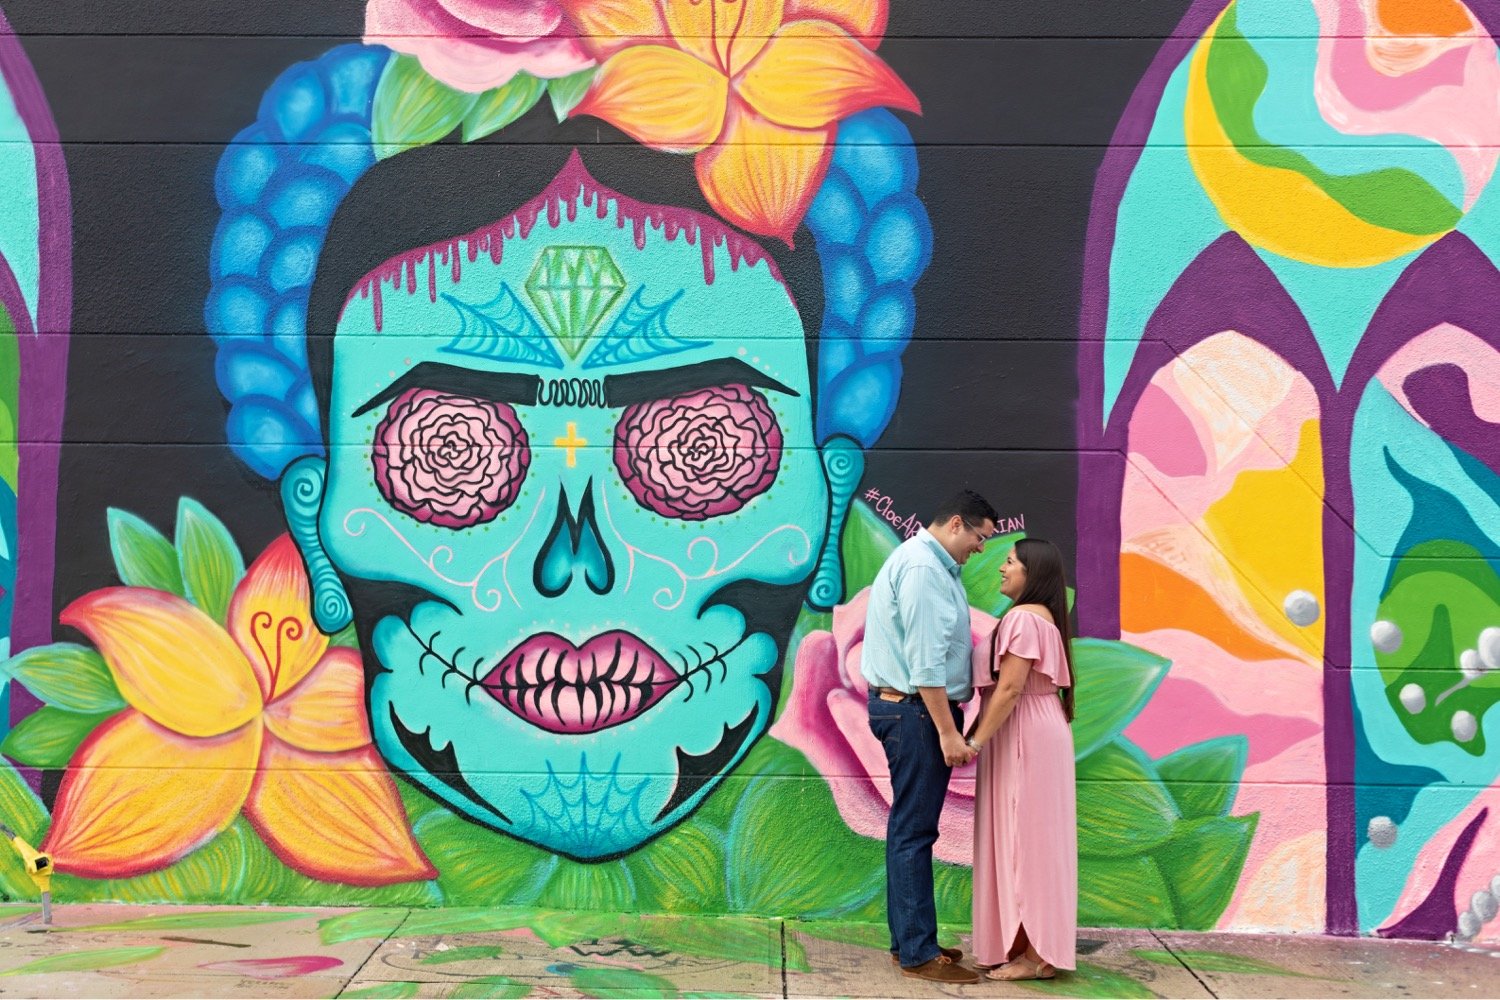 02_Wynwood-Walls-Engagement-Session-Miami-Engagement-Photographer_6402_posing_during_couple_in_walls_engagement_wynwood_hispanic_a_session_Mural_thier_of_front_Miami_photographer.jpg